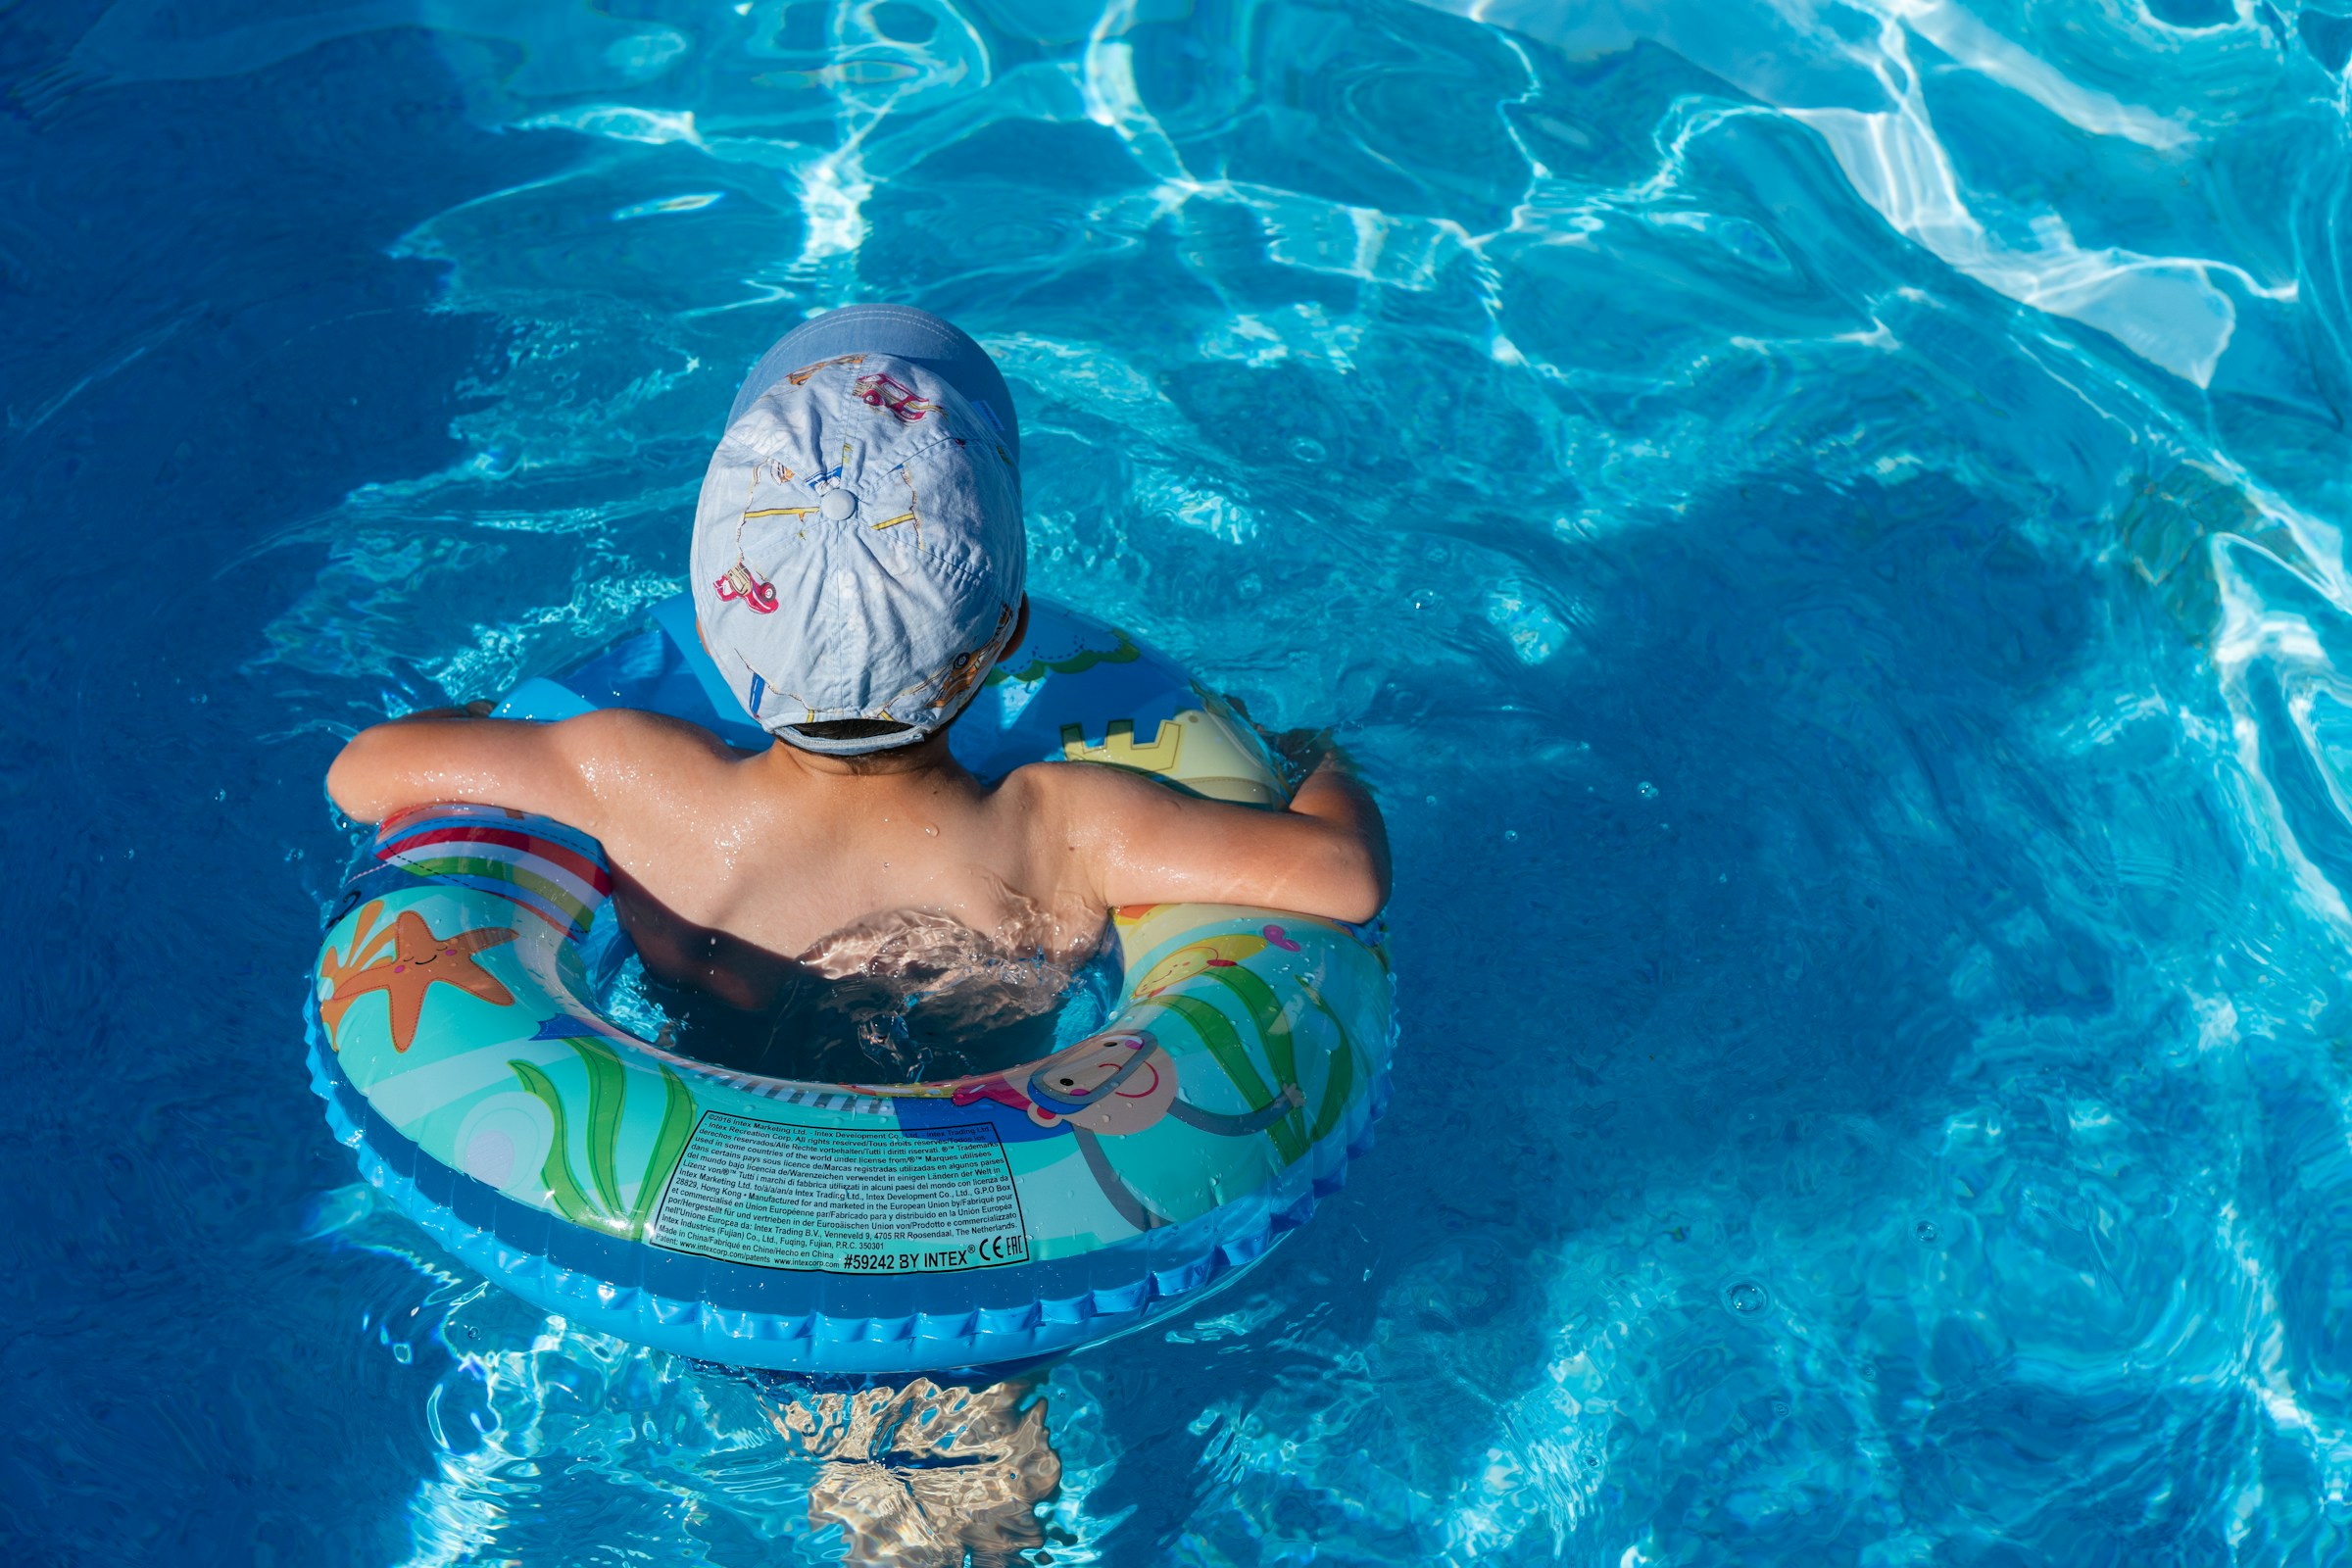 A child in a swimming pool | Source: Pexels